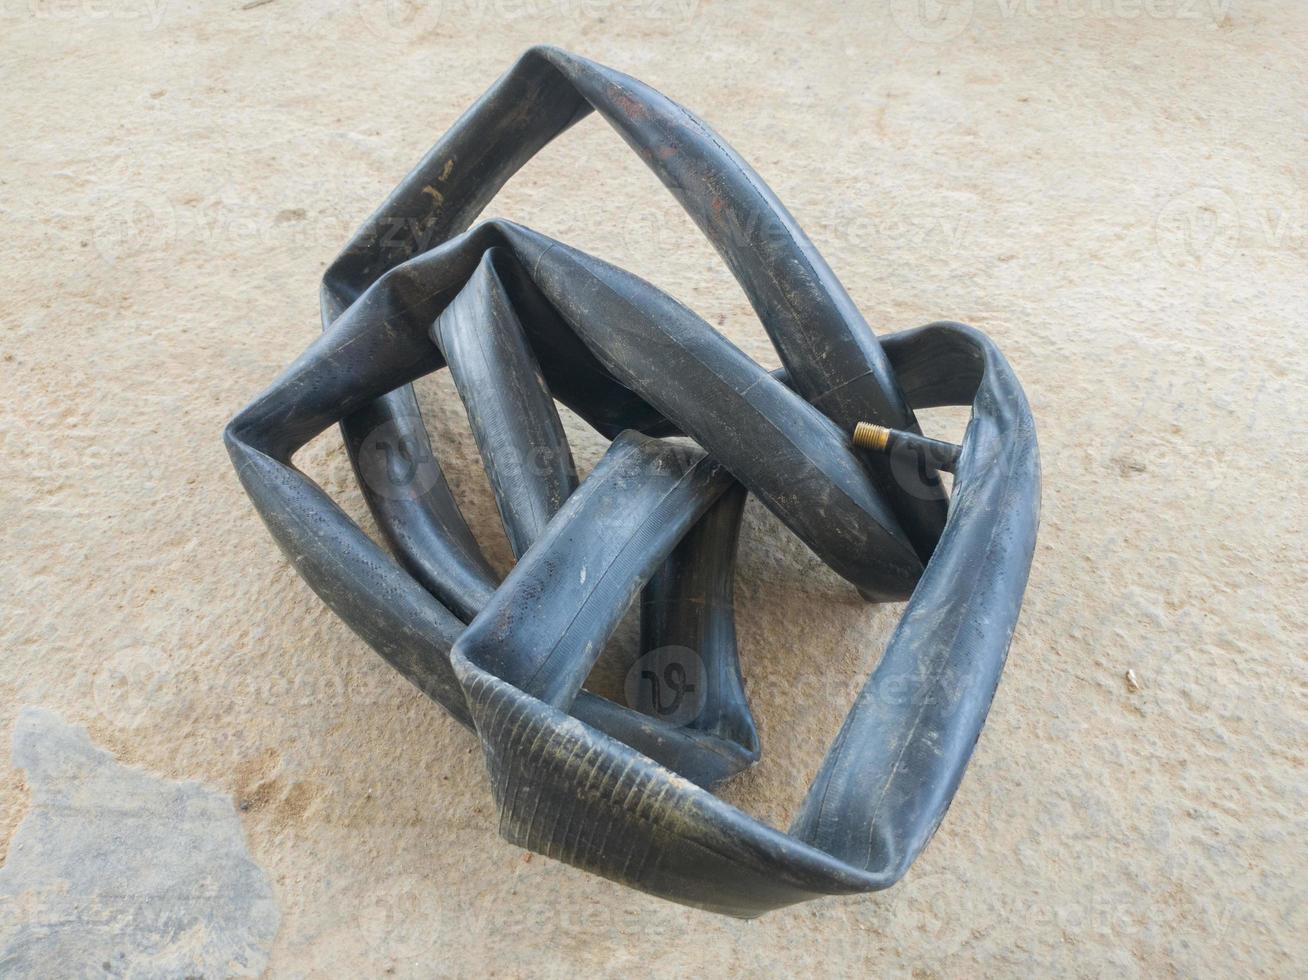 A leaky bicycle inner tube can be used as a rubber band photo